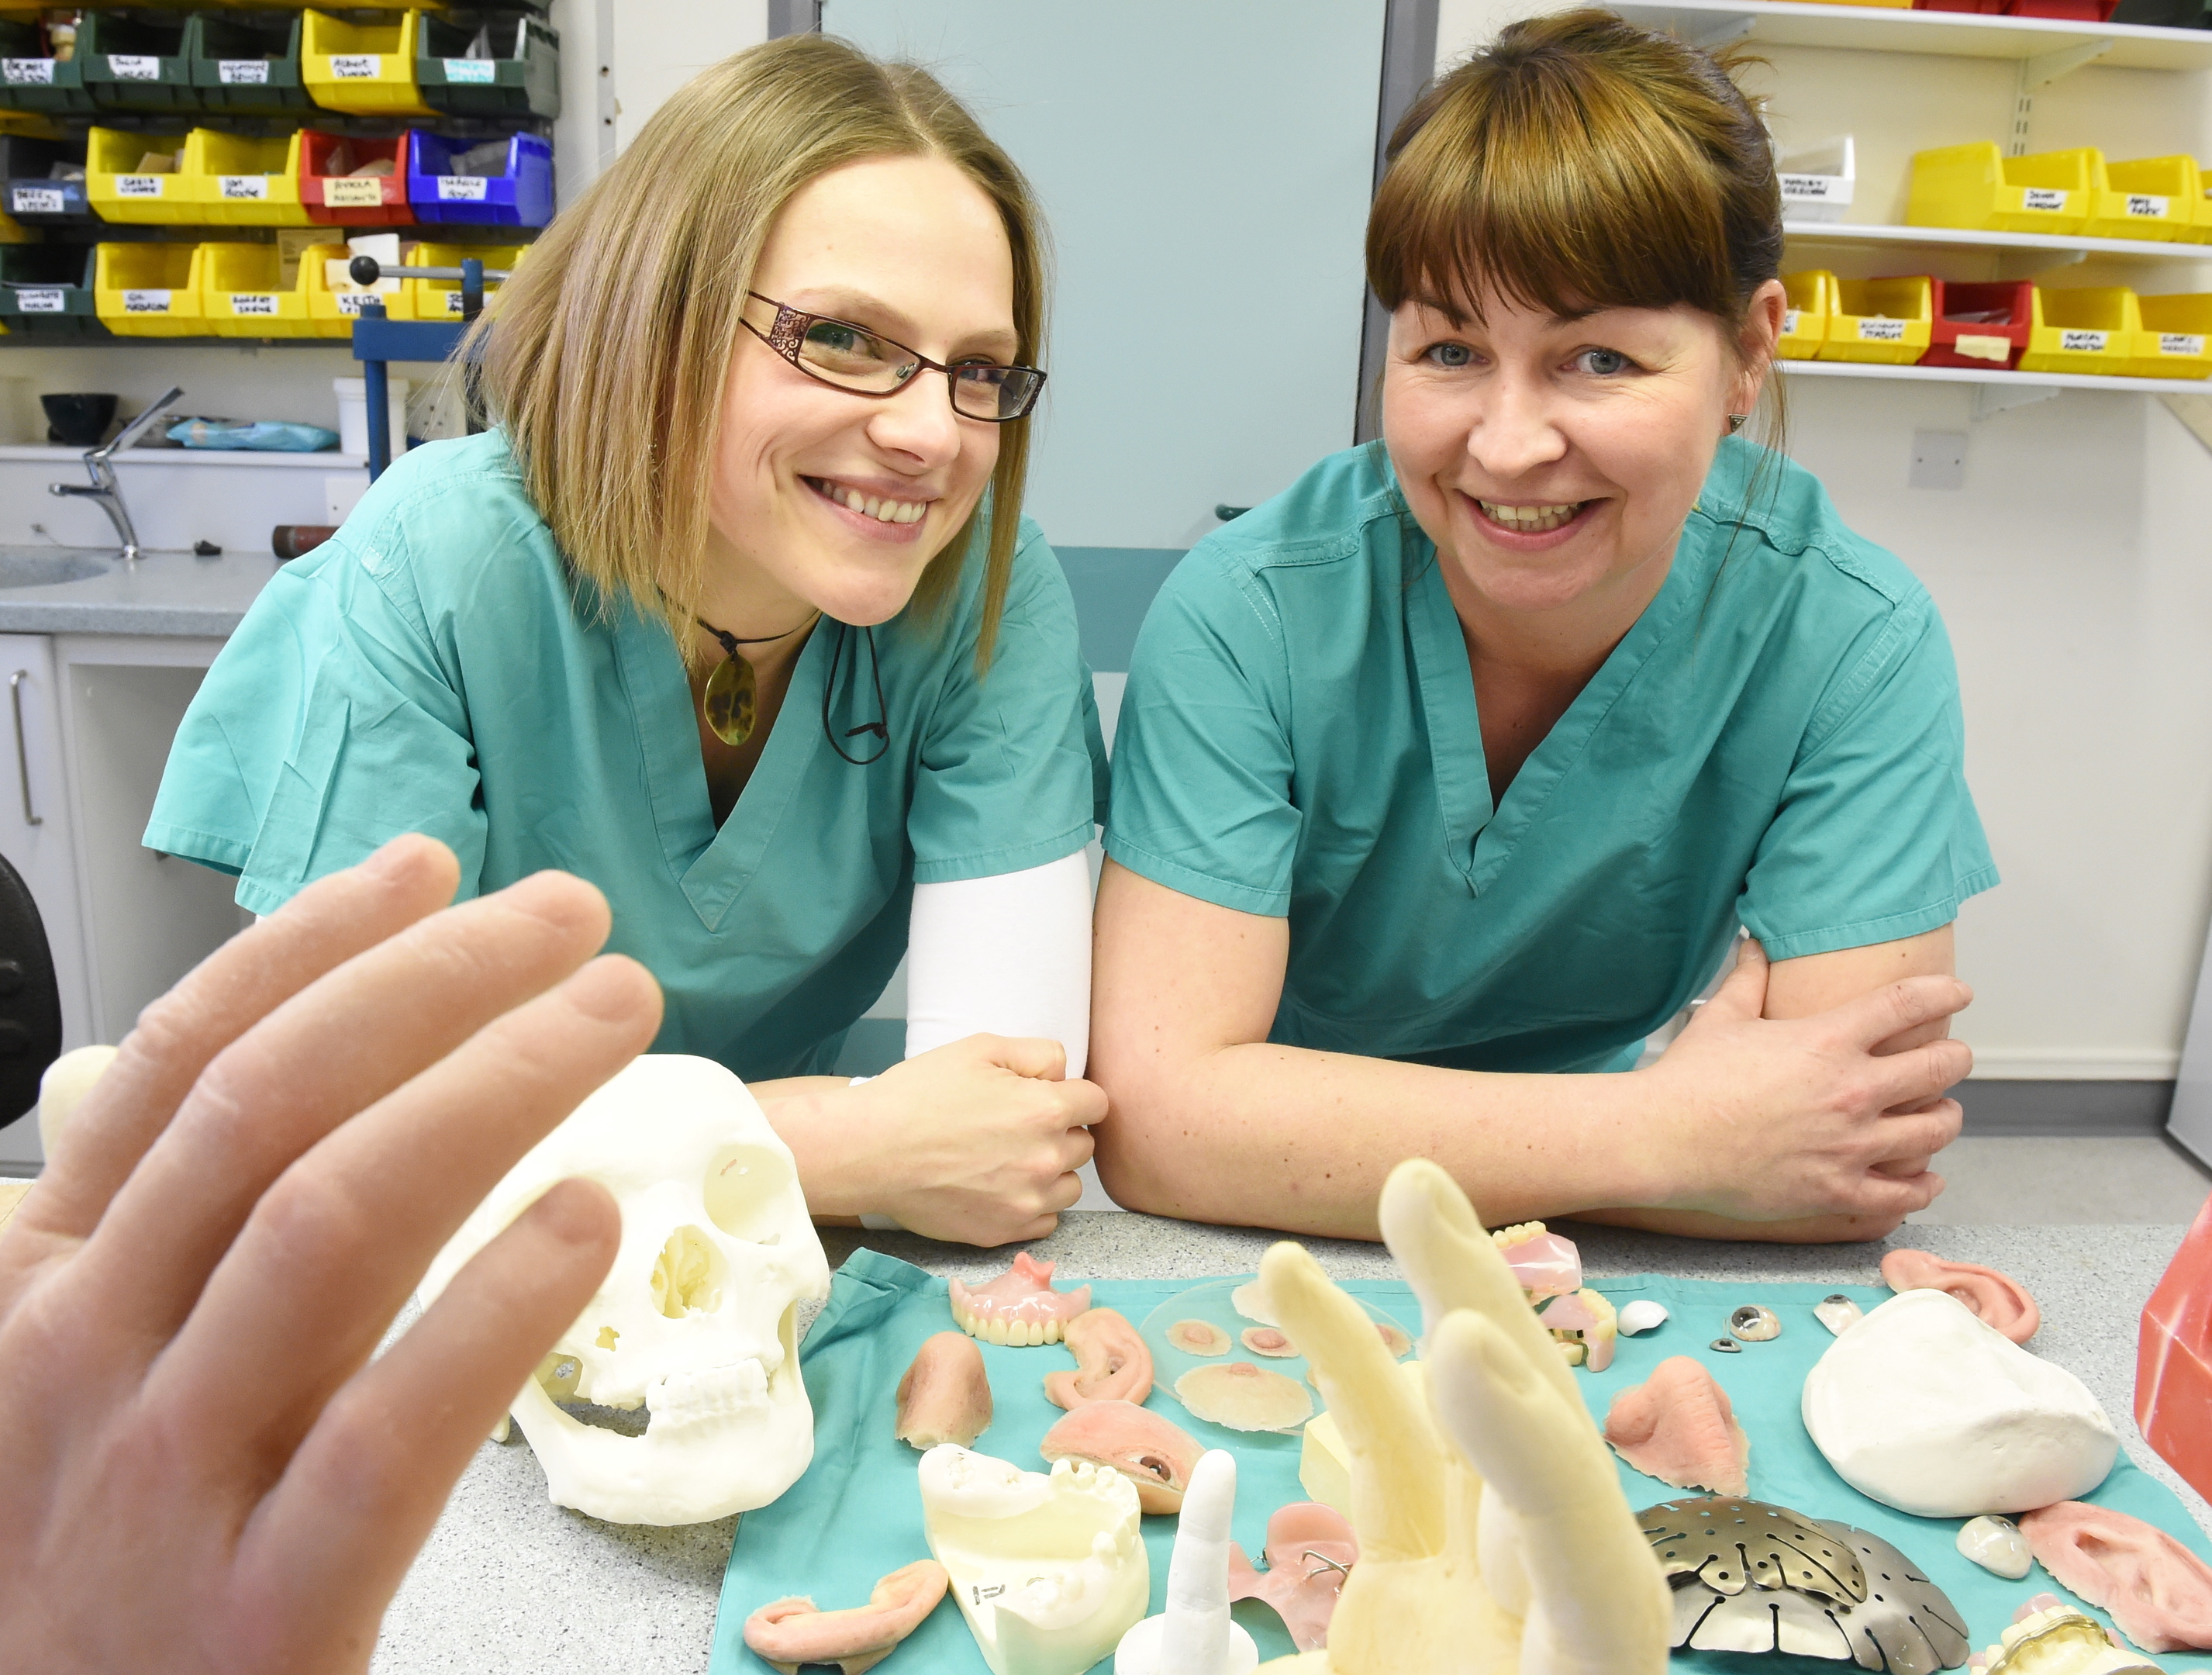 Maxillofacial prosthetist, Justyna Kruczynska, the first in Scotland to qualify for distance learning, based at ARI, Aberdeen. In the picture are Justyna Kruczynska, left with Karen Boyd, lab manager.
Picture by Jim Irvine  5-3-18